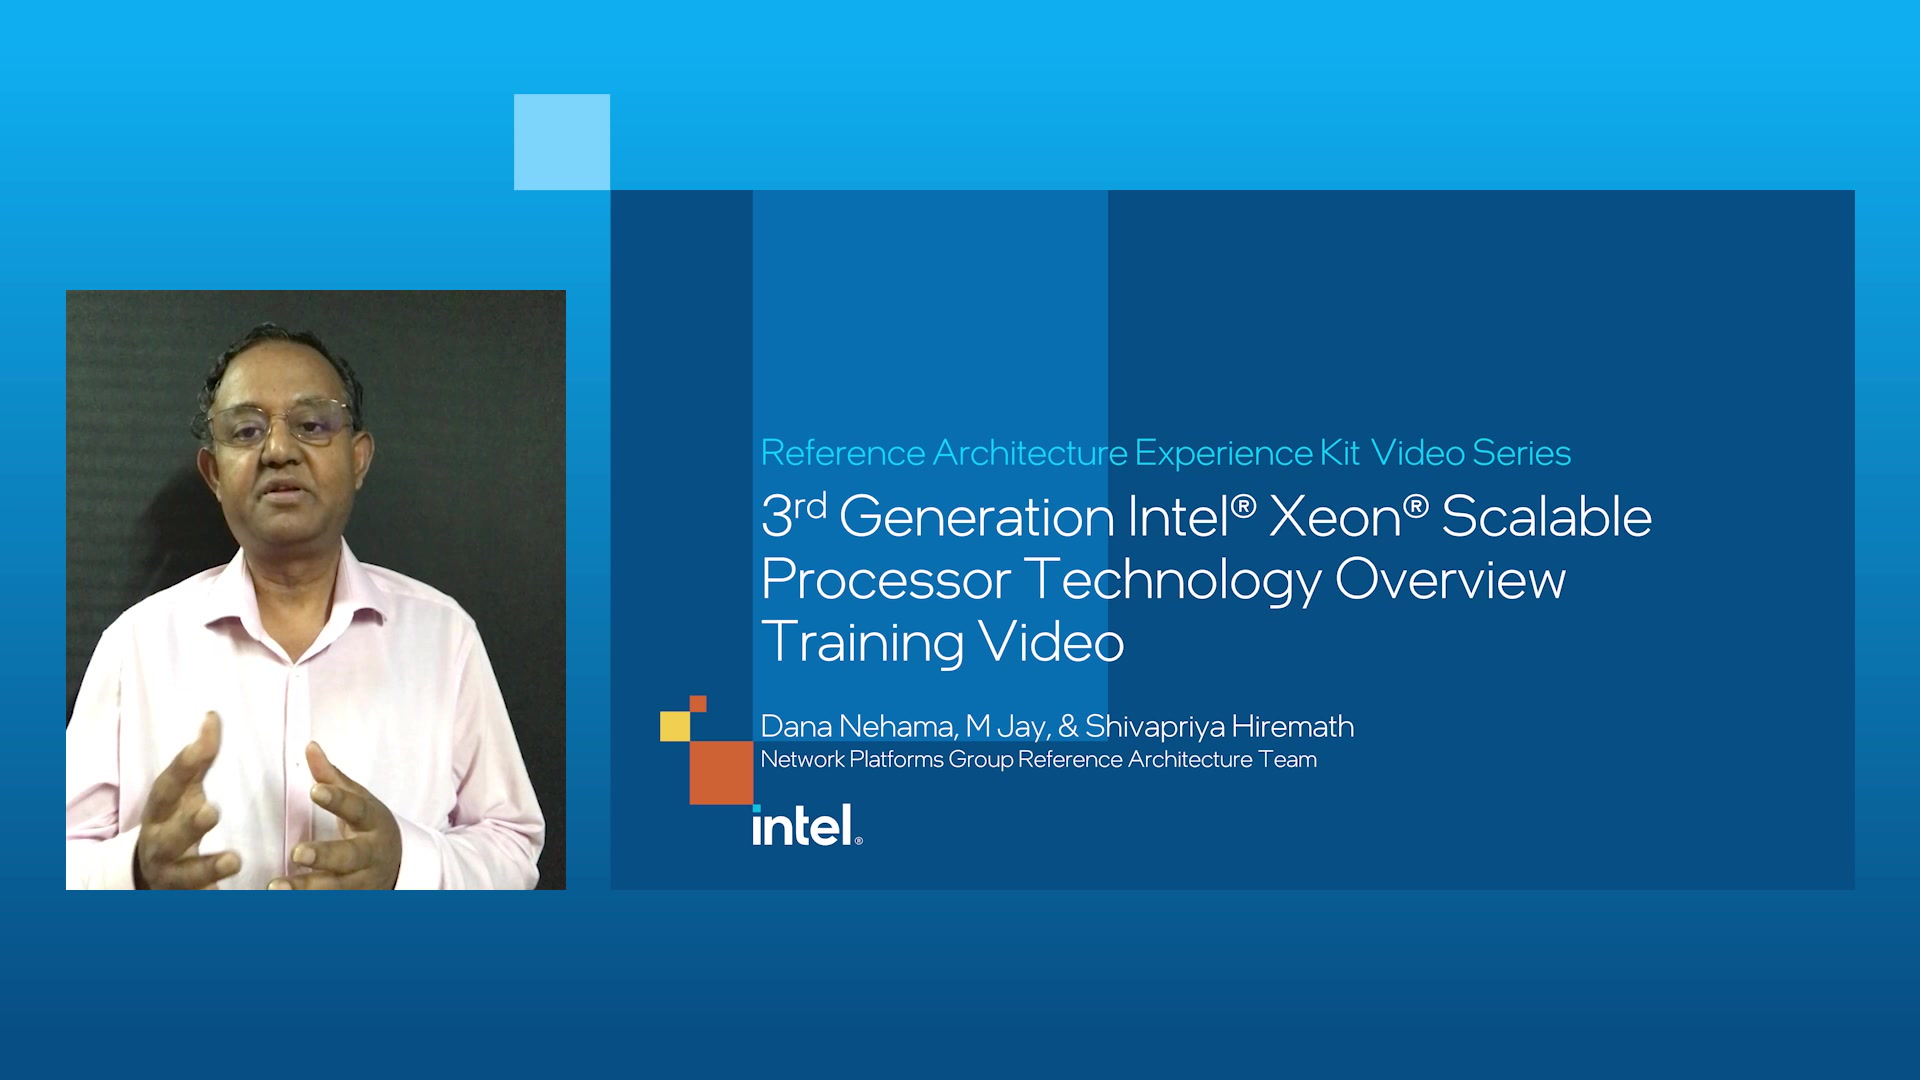 Chapter 1: 3rd Generation Intel® Xeon® Scalable Processor Technology Overview